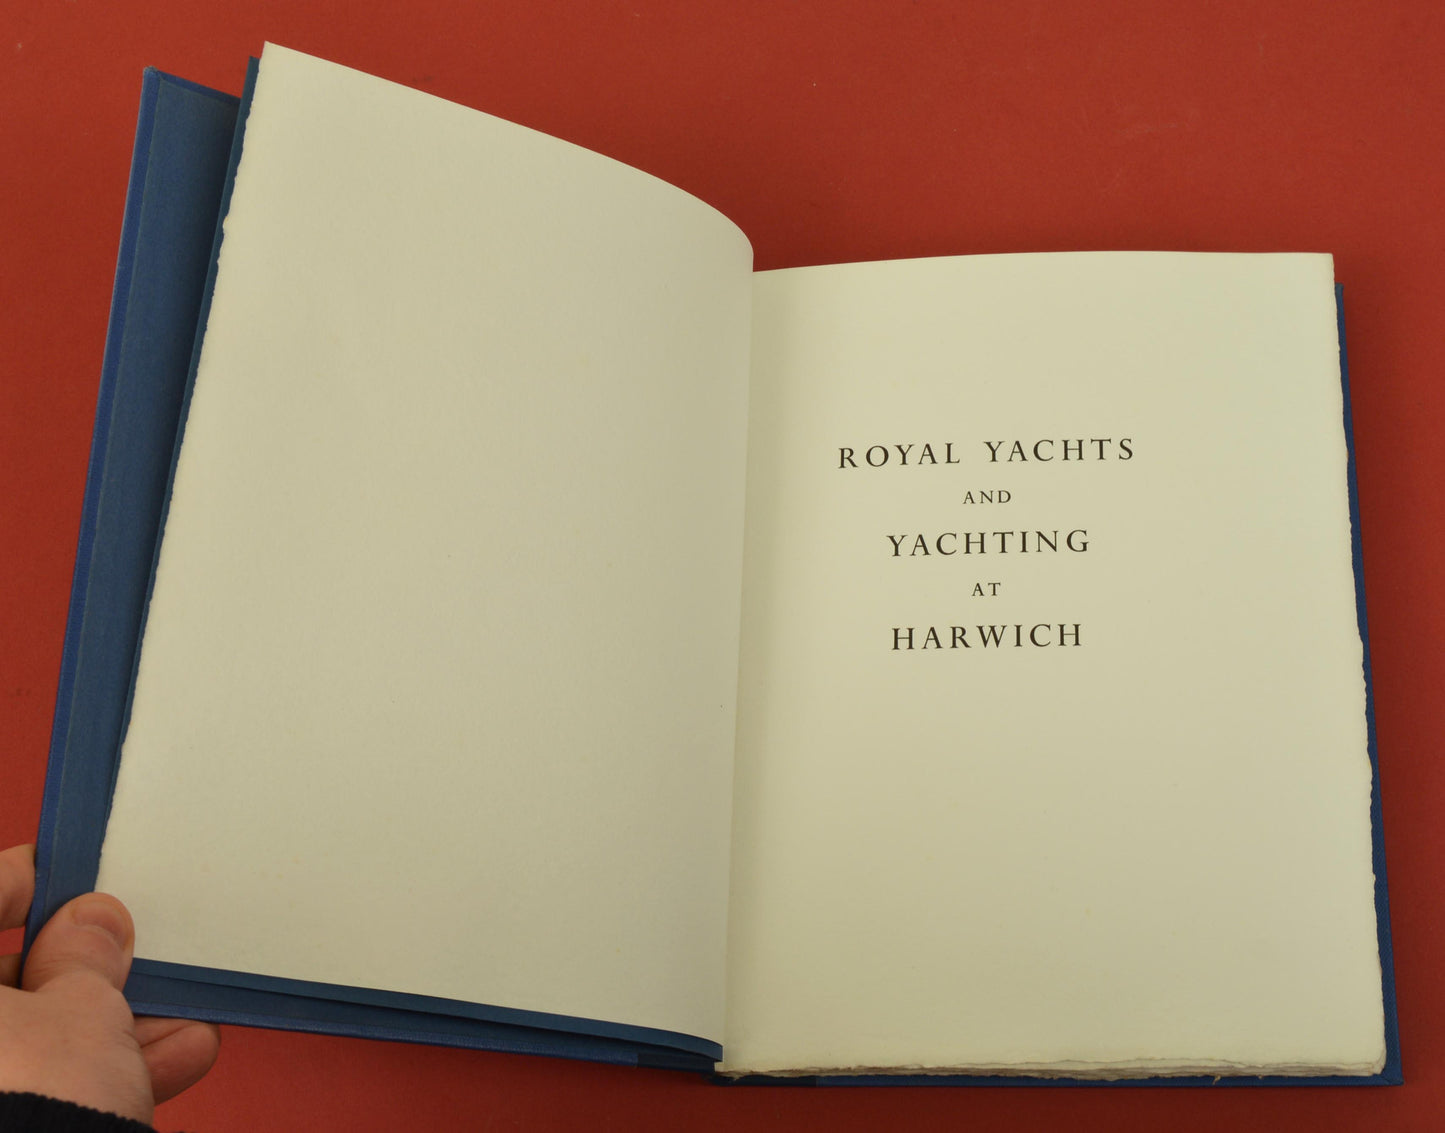 Royal Yachts and Yachting at Harwich, Limited Edition of 25, pub. 1958